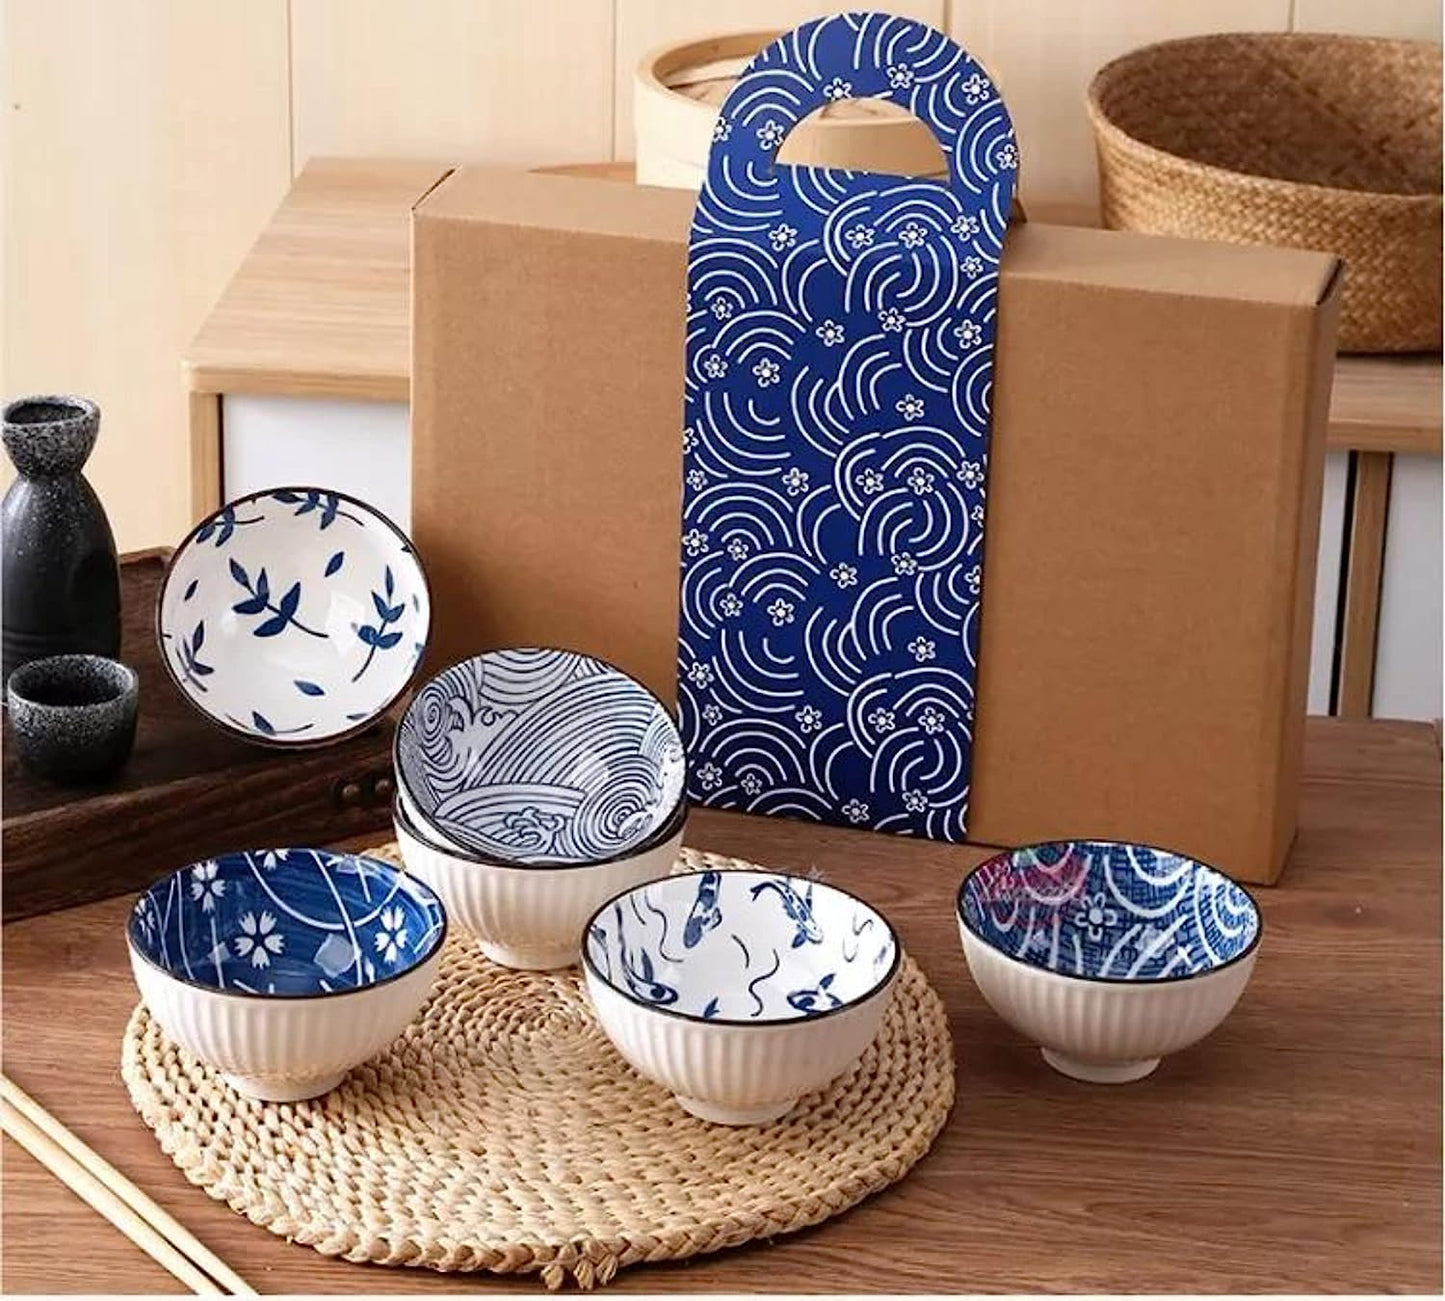 Japanese Blue and White bowls